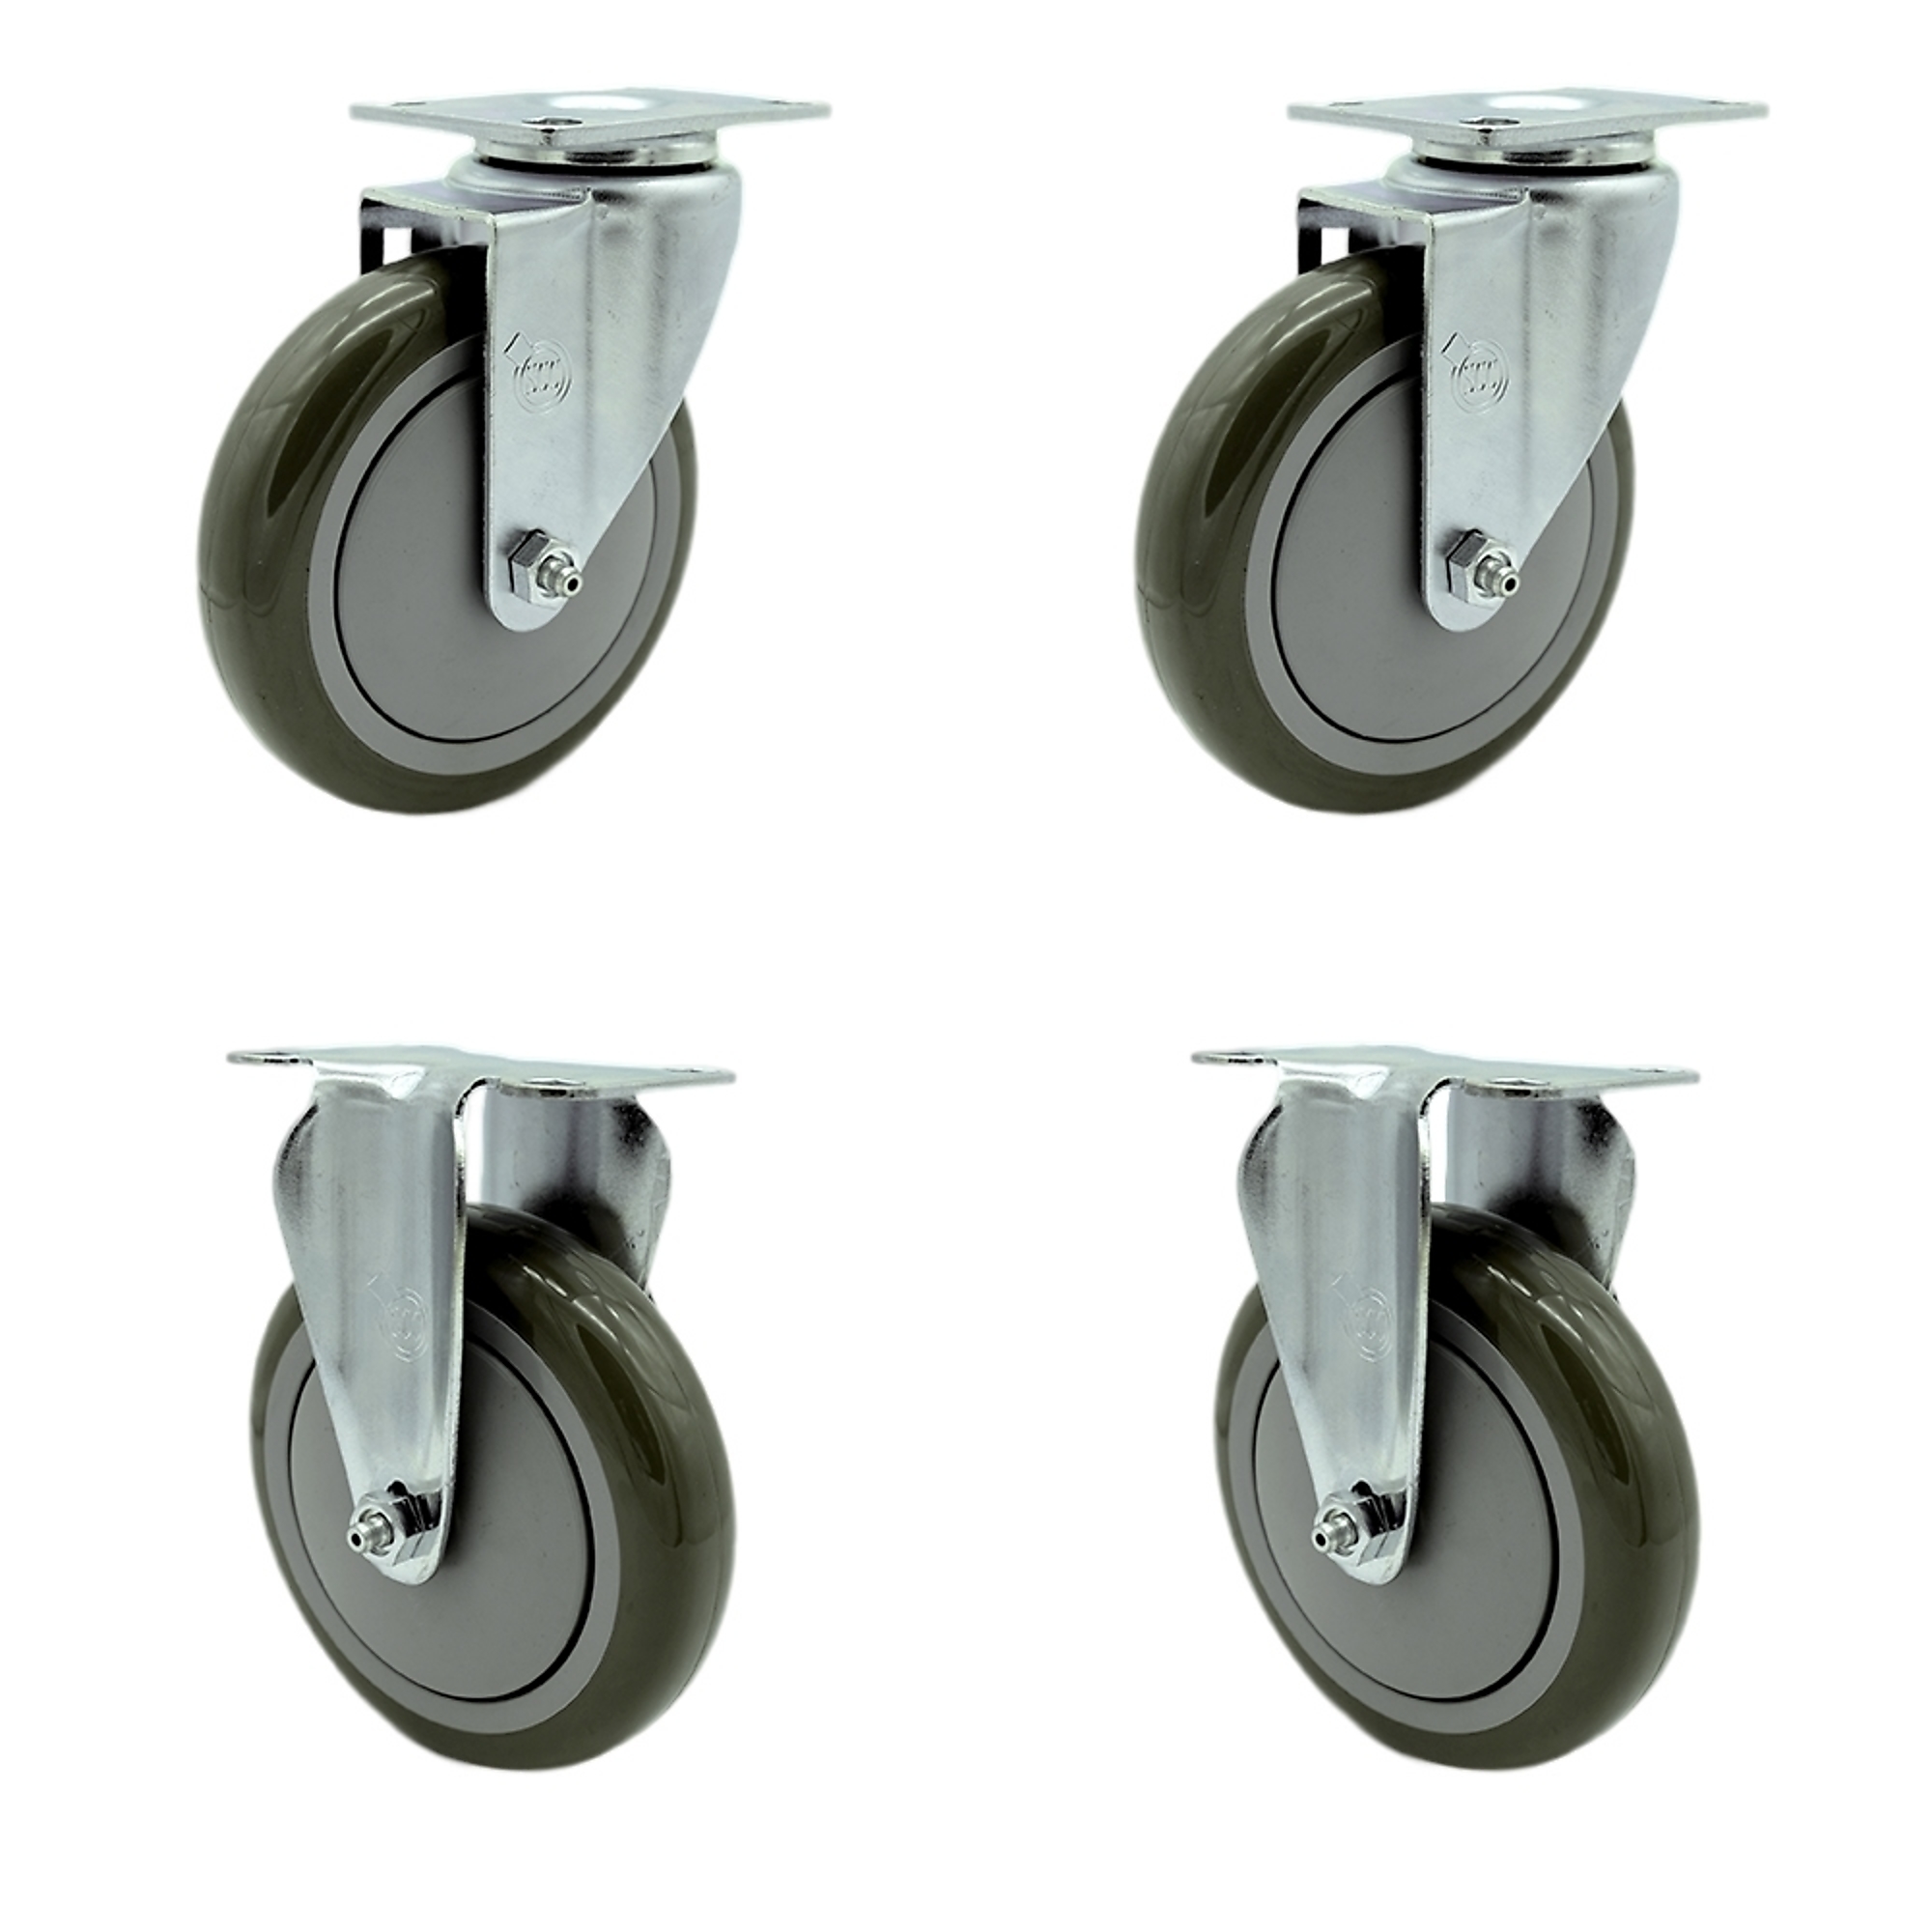 Service Caster, 5Inch x 1 1/4Inch Plate Casters, Wheel Diameter 5 in, Caster Type Swivel, Package (qty.) 4, Model CAM-SCC-20S514-PPUB-2-R514-2 -  734005058536